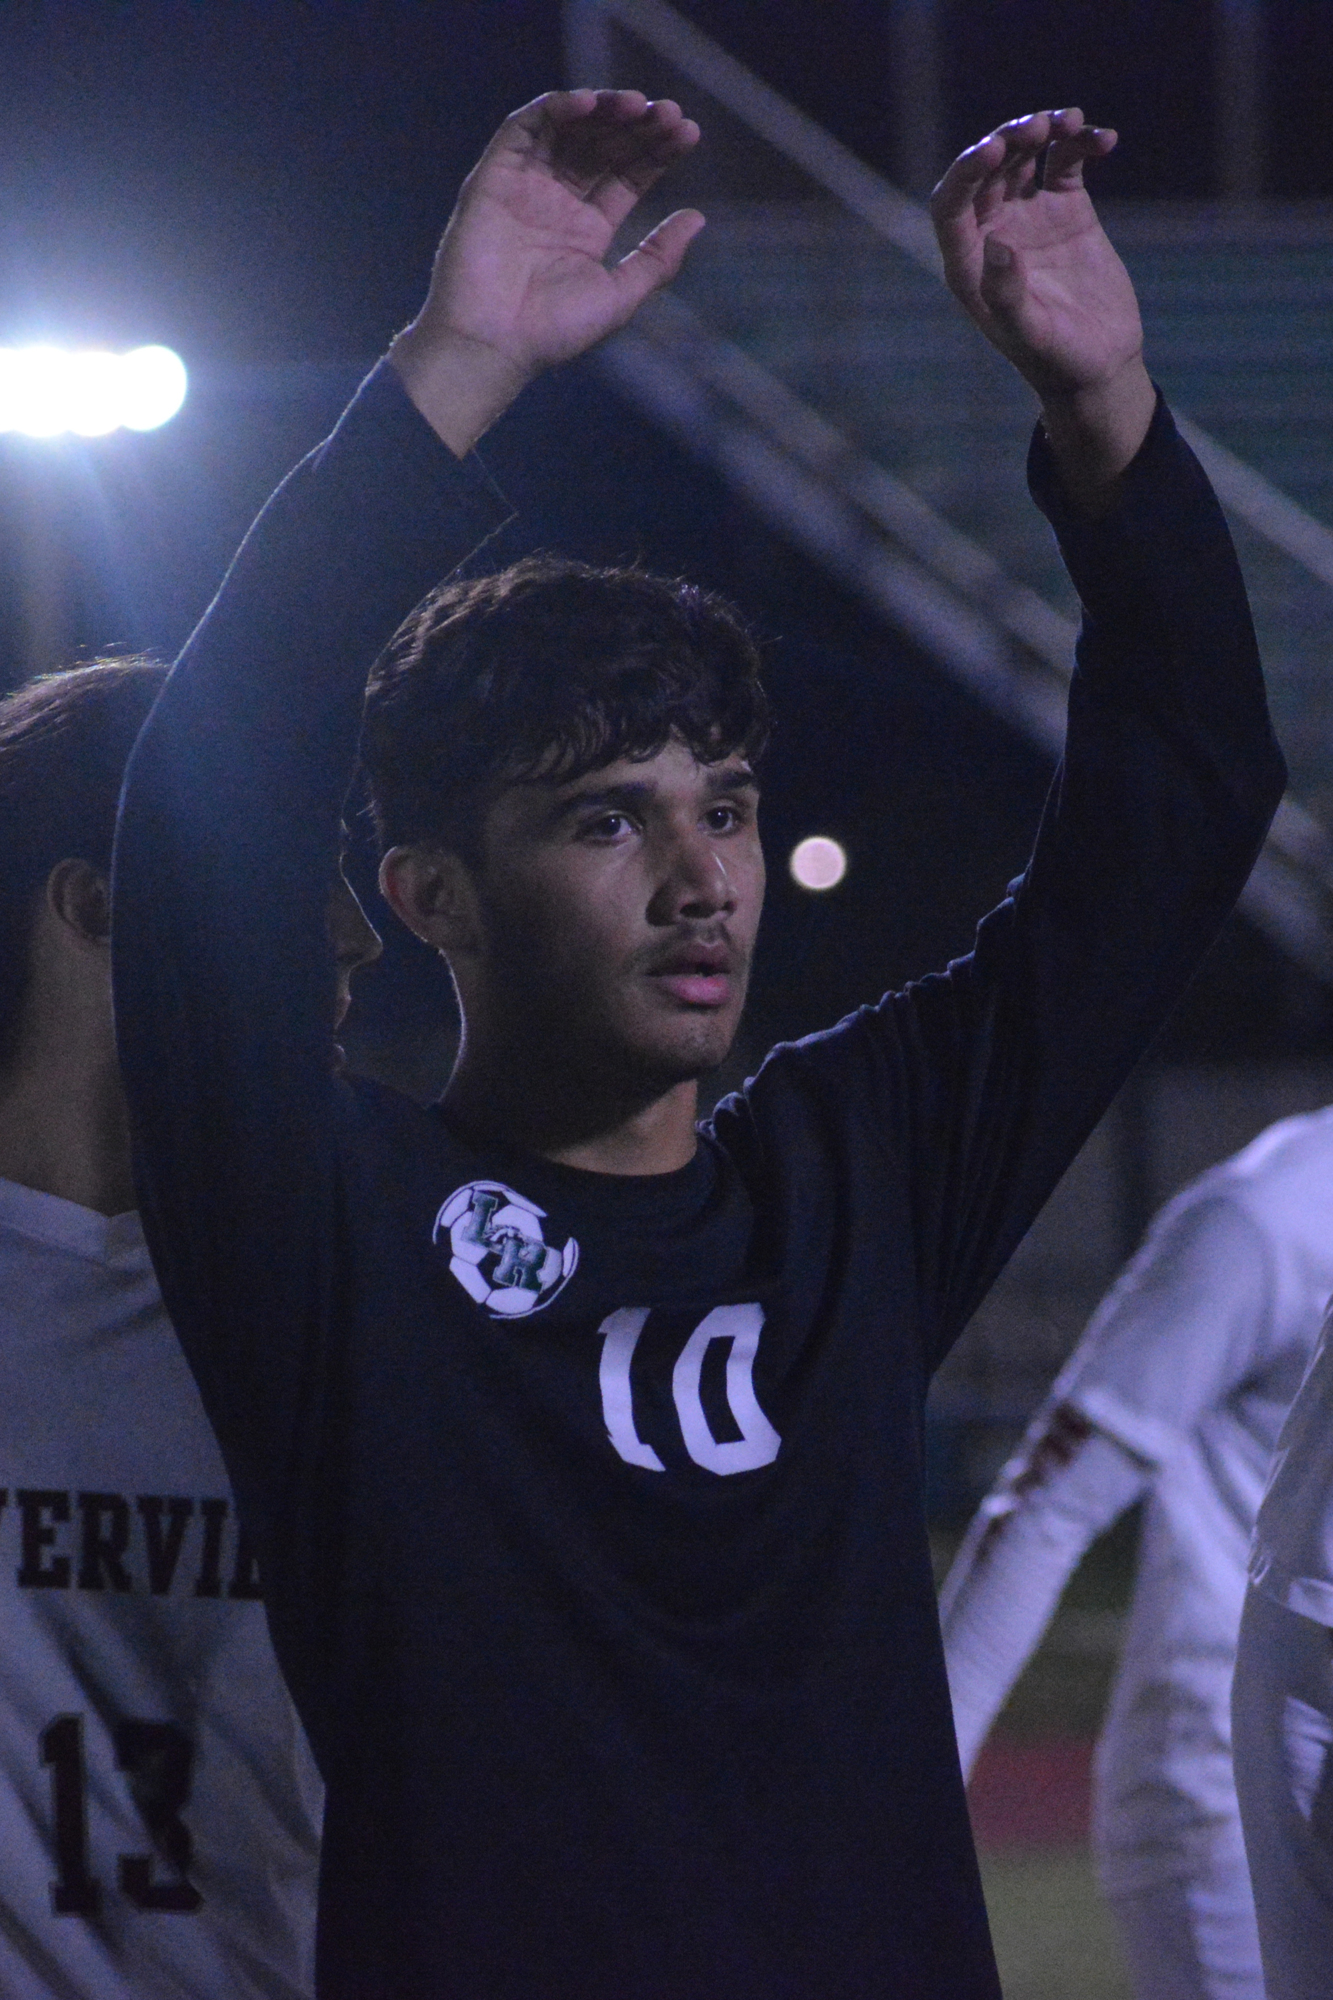 Mustangs senior Wilmer Yanez raises his hands before a corner kick to block defenders' view. Yanez leads the team with 11 goals through eight games.